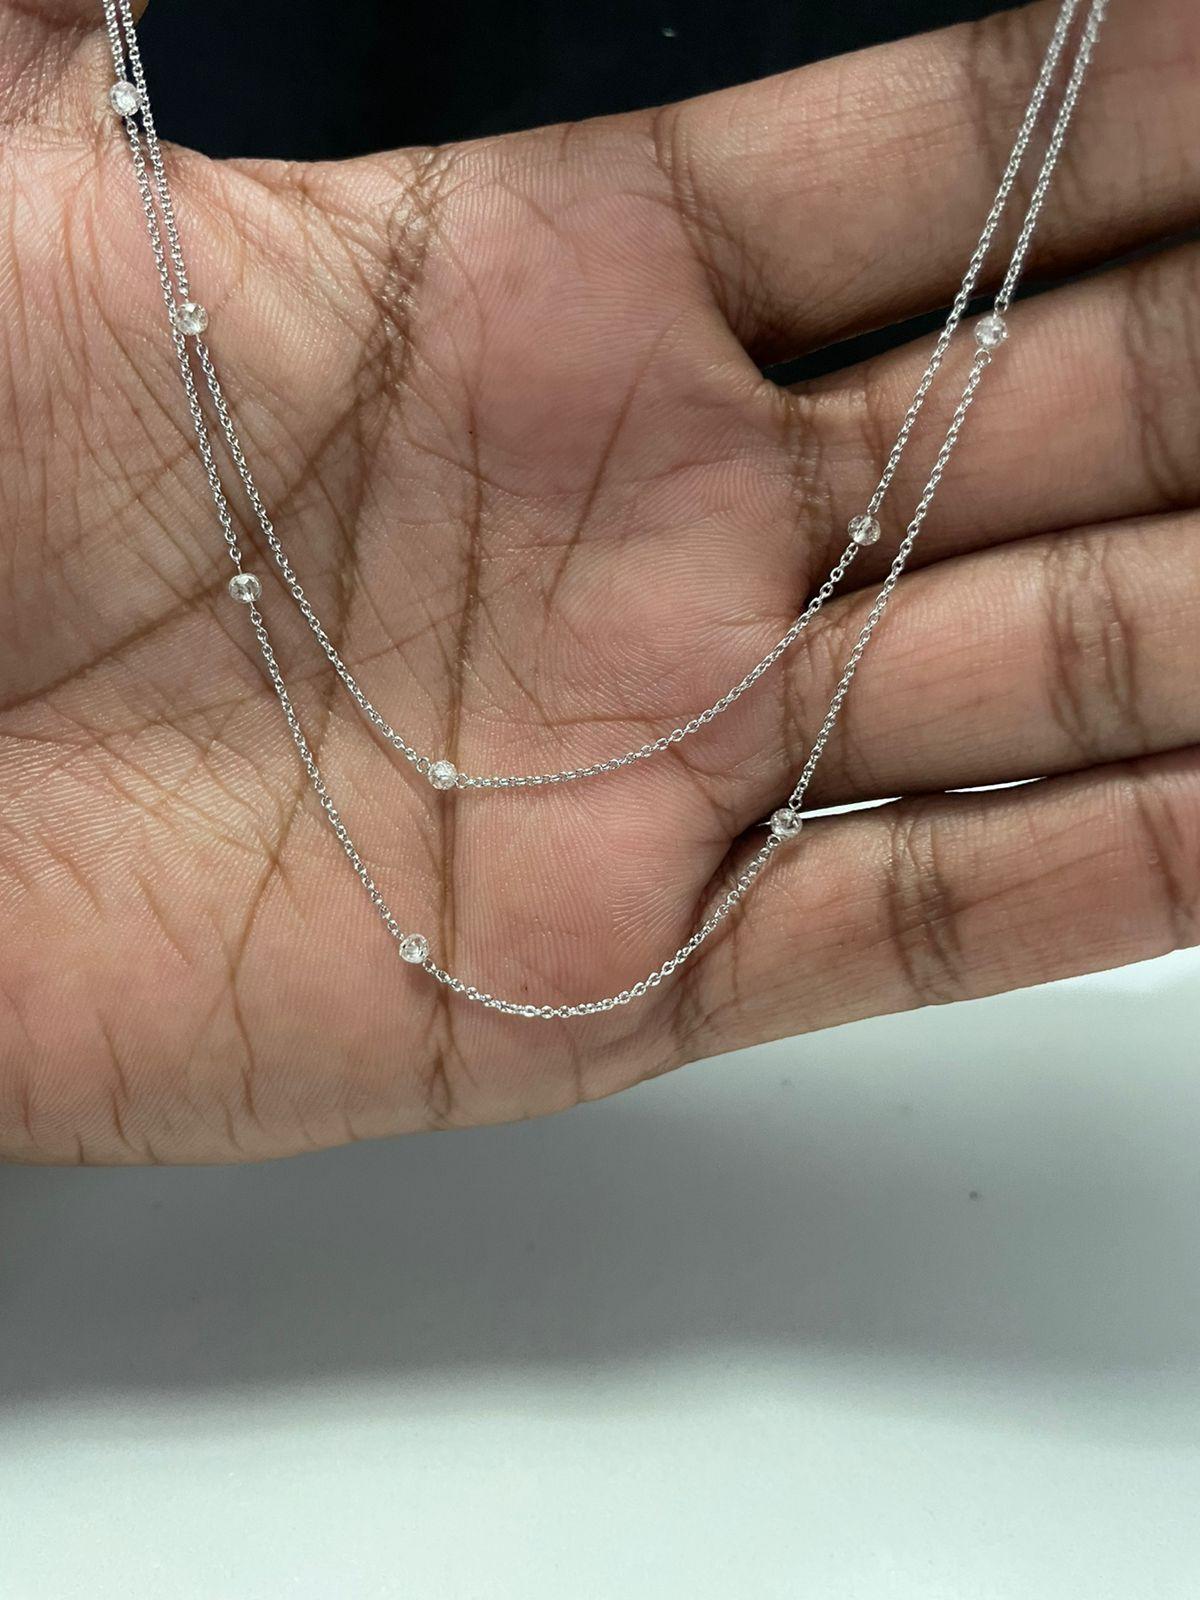 16 vs 18 inch necklace